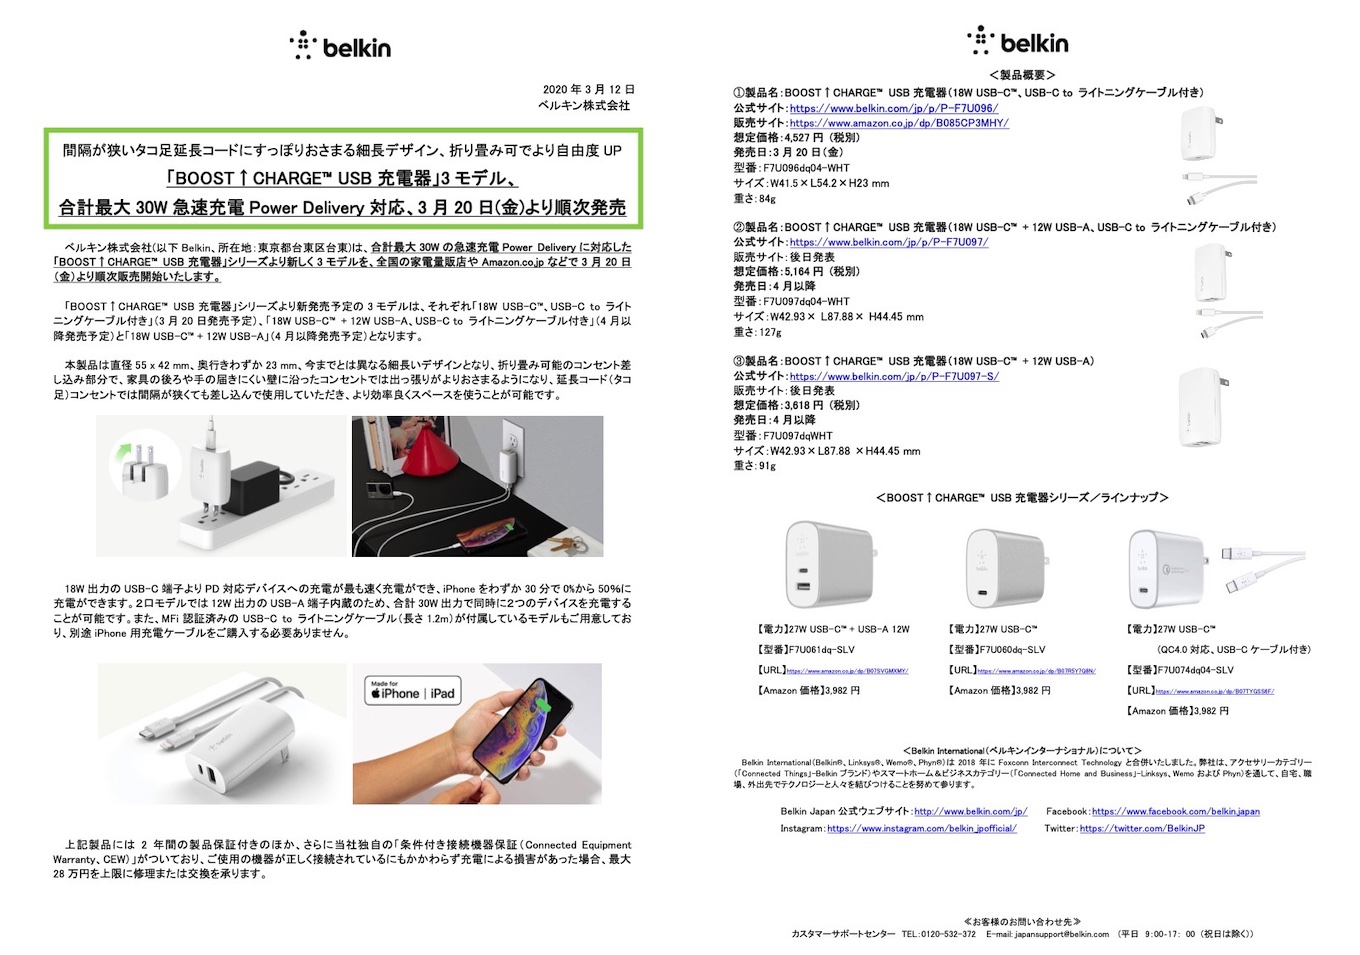 BelkinがBOOST↑CHARGE™ USB充電器発売